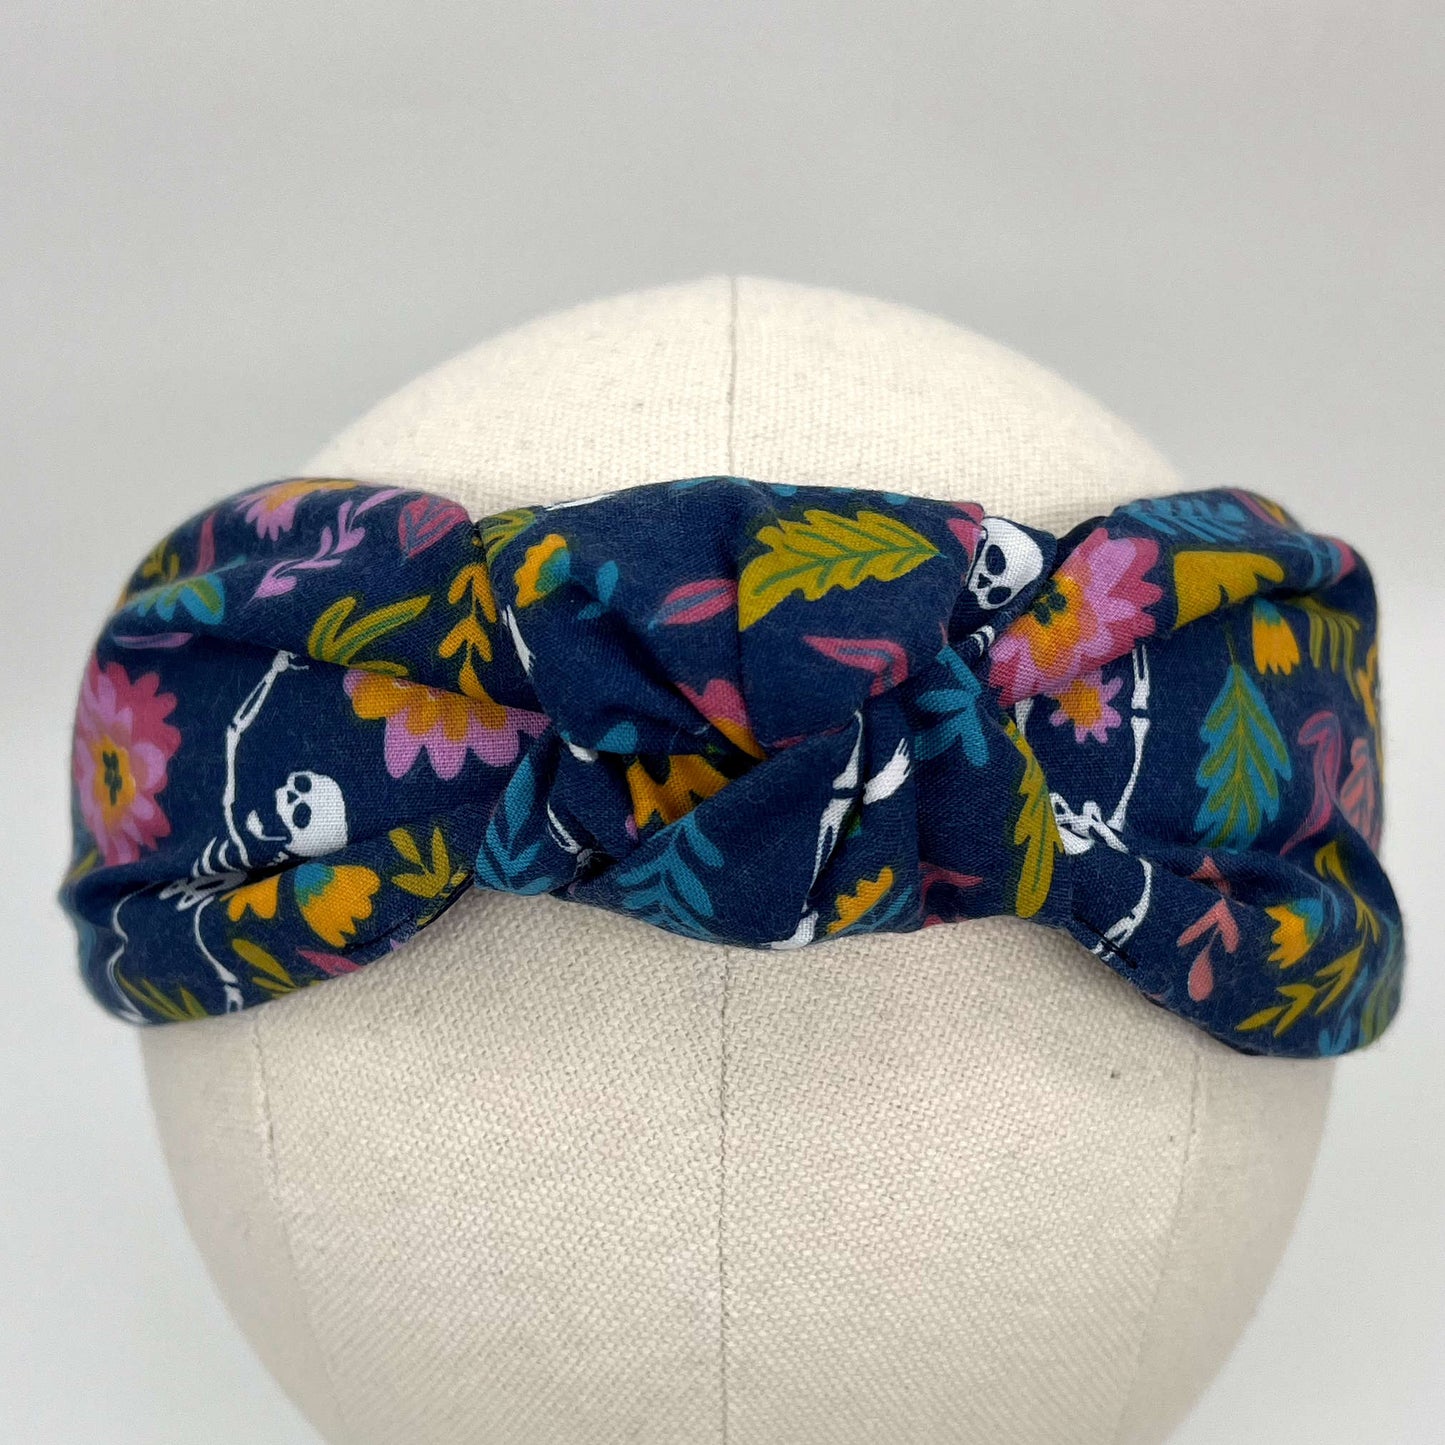 Floral Skeleton Classic Knot Headband in Blue